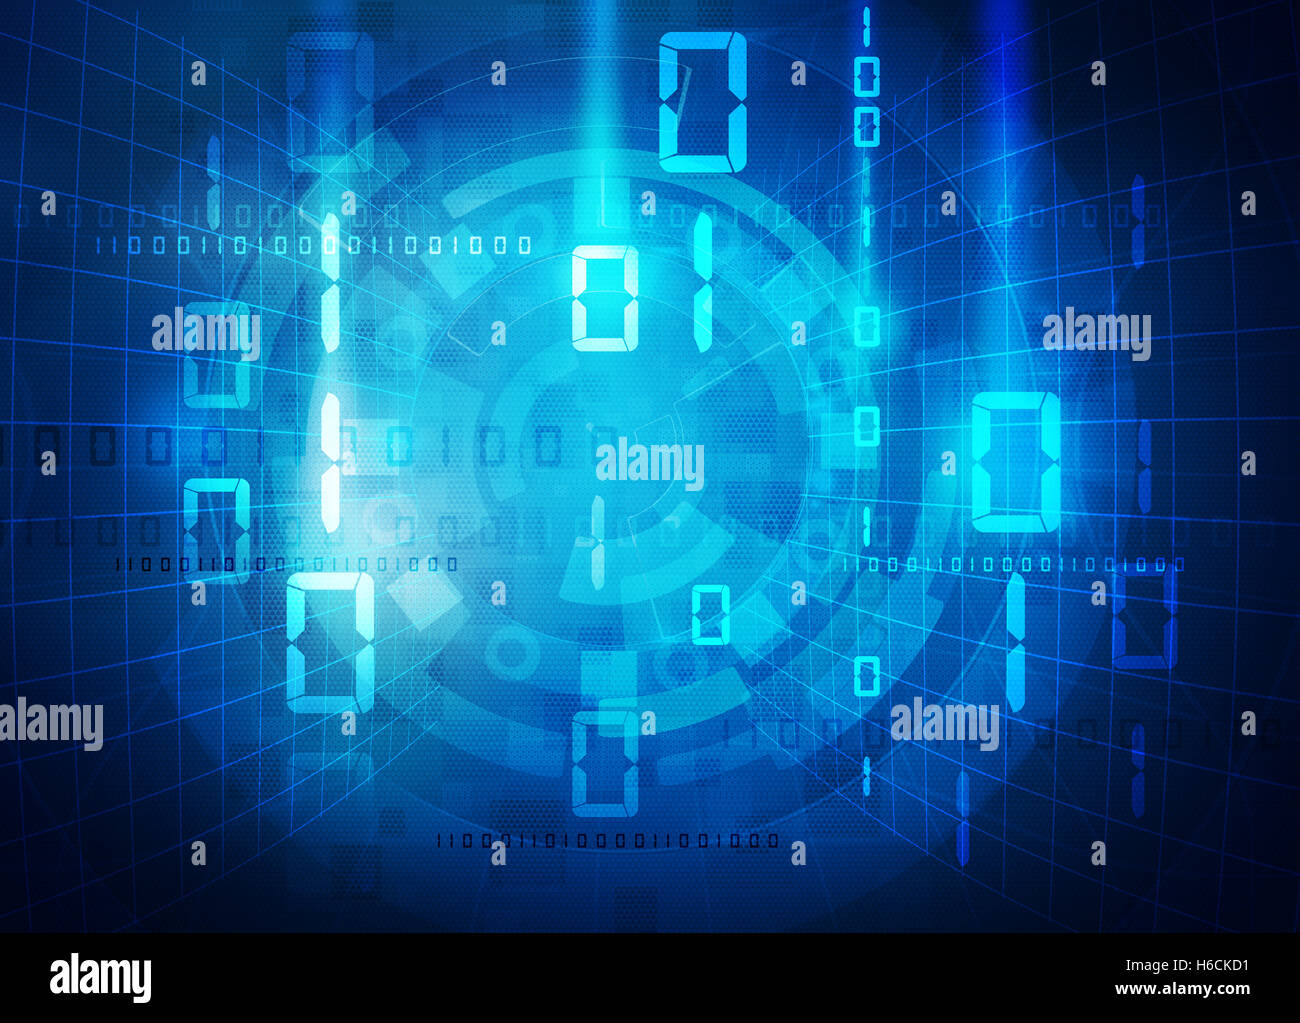 blue technology background with binary data Stock Photo